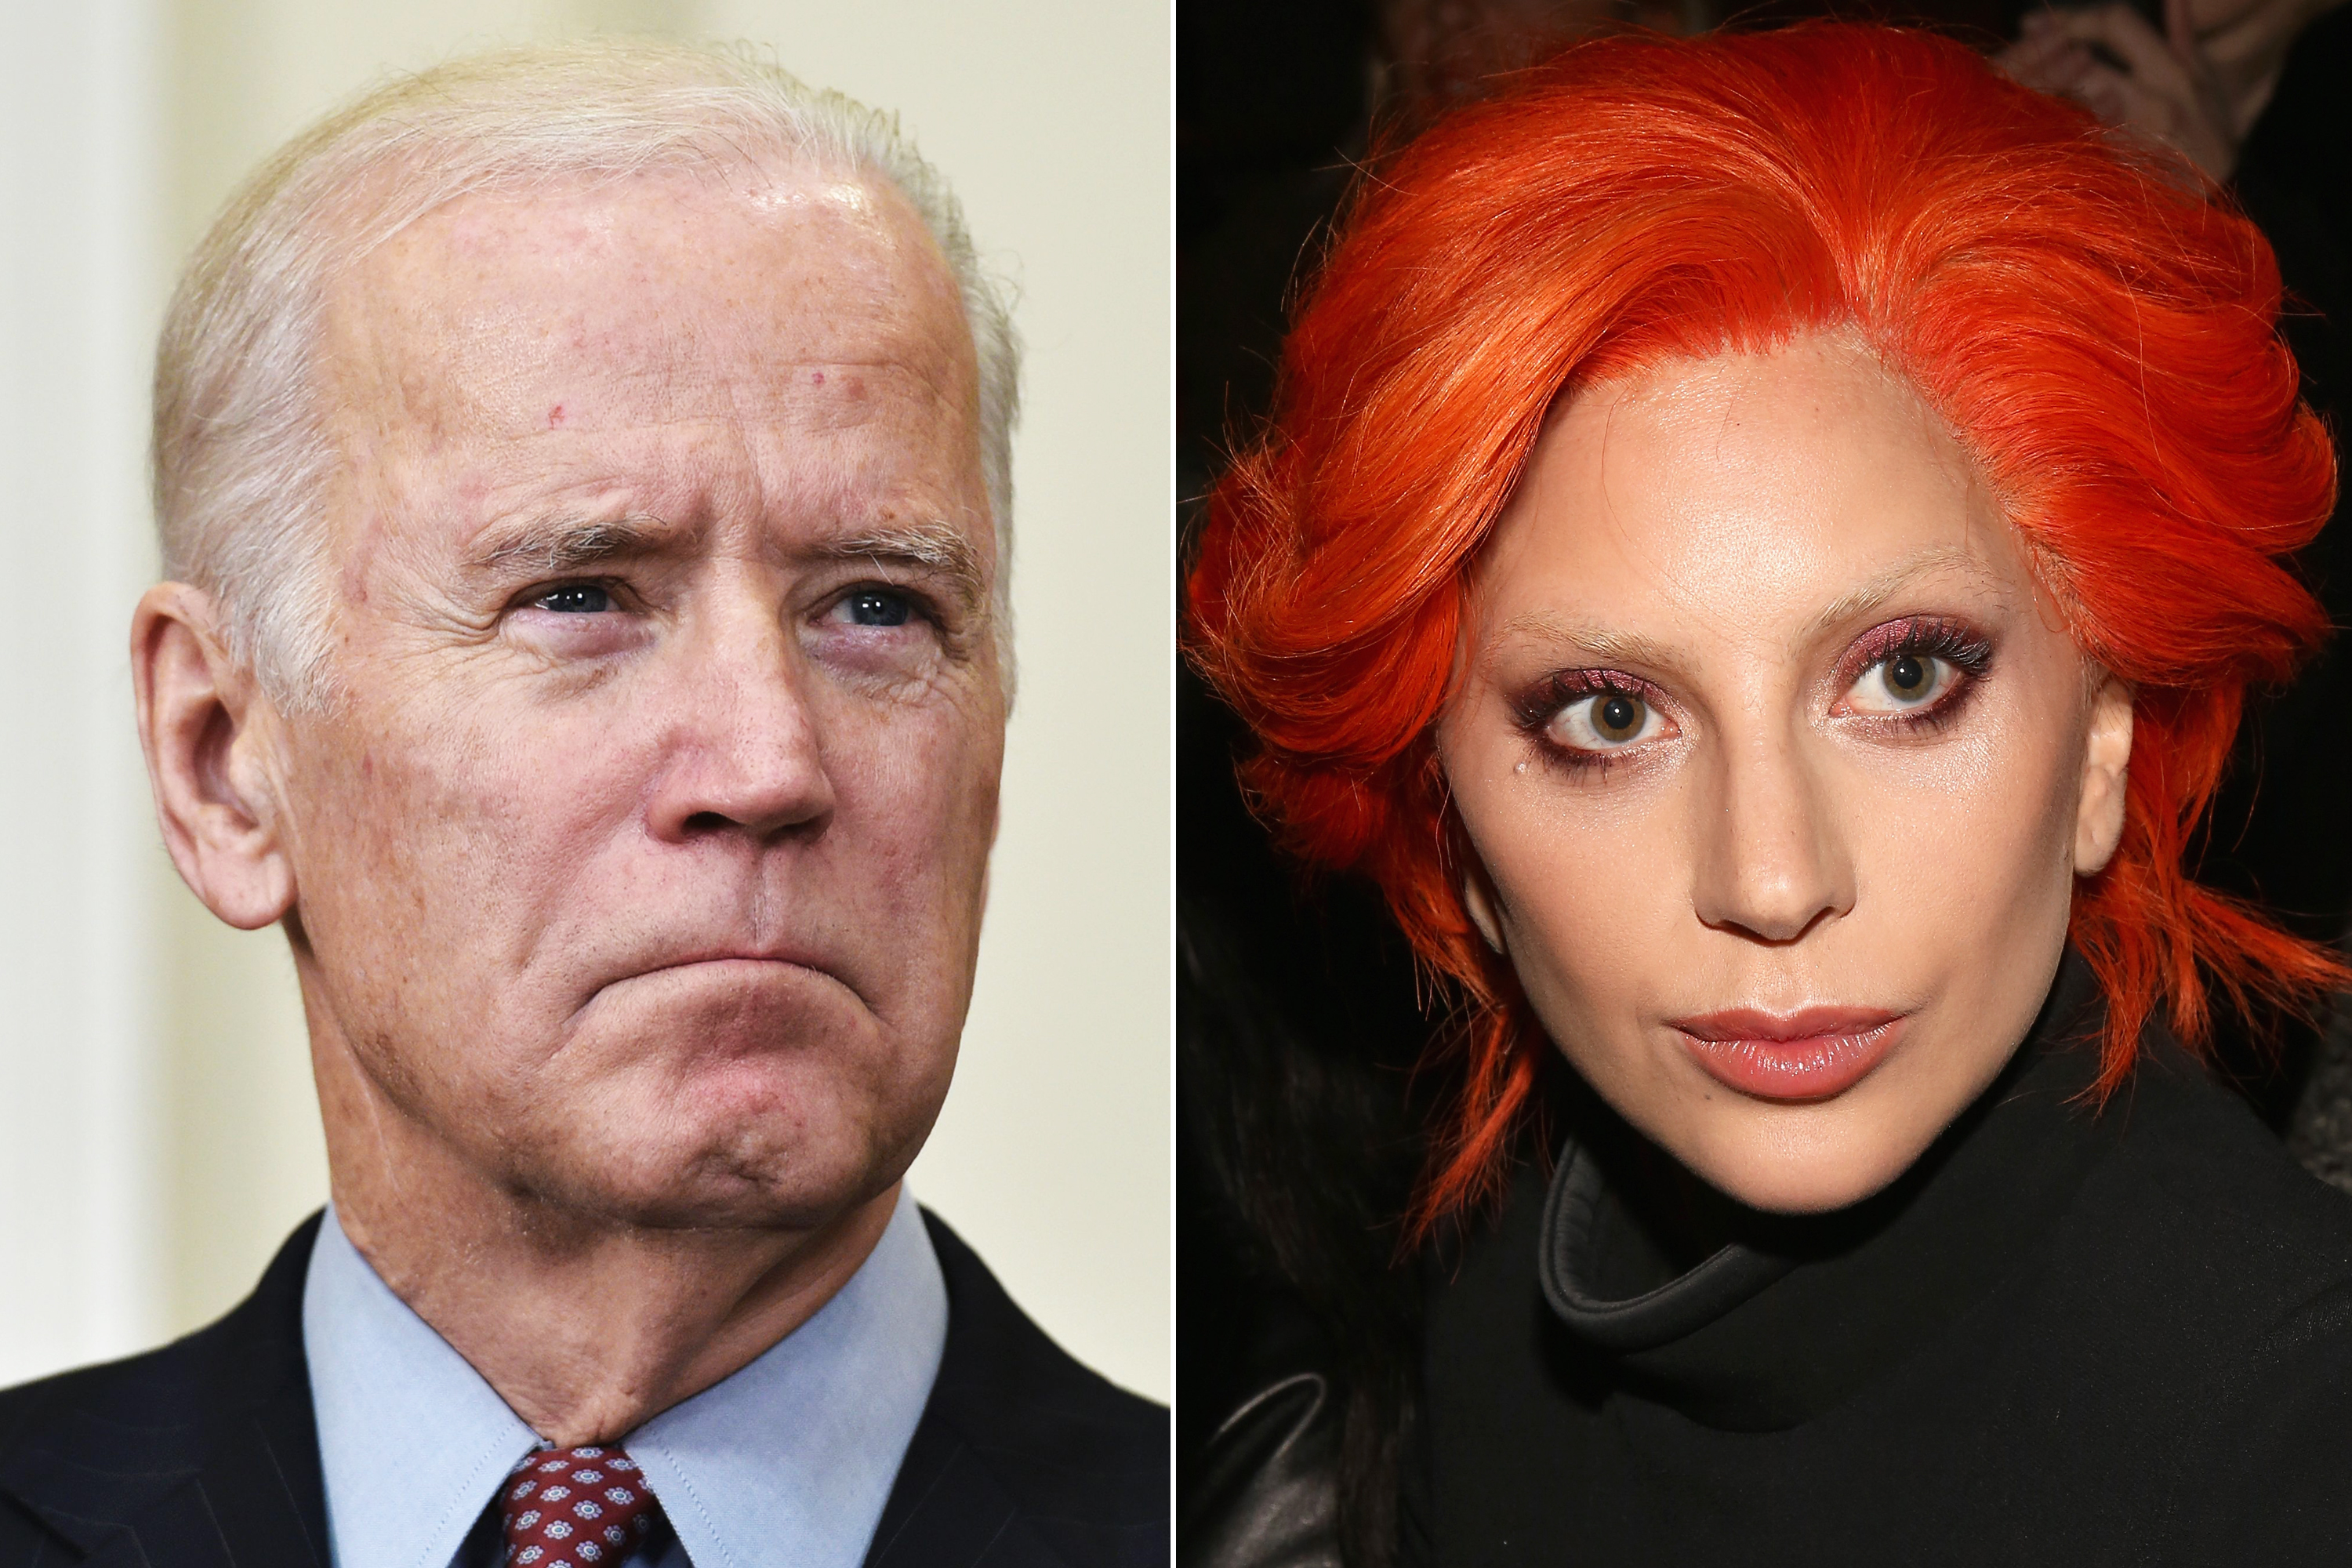 <i> Left </i> Joe Biden is seen as President Barack Obama speaks on the Guantanamo Bay detention camp in the Roosevelt Room of the White House in Washington, DC.  on Feb. 23, 2016. <i> Right </i> Lady Gaga attends Brandon Maxwell Fall 2016 New York Fashion Week at Monkey Bar in New York City on Feb. 16, 2016. (Mandel Ngan—Getty Images; Paul Zimmerman—Getty Images)